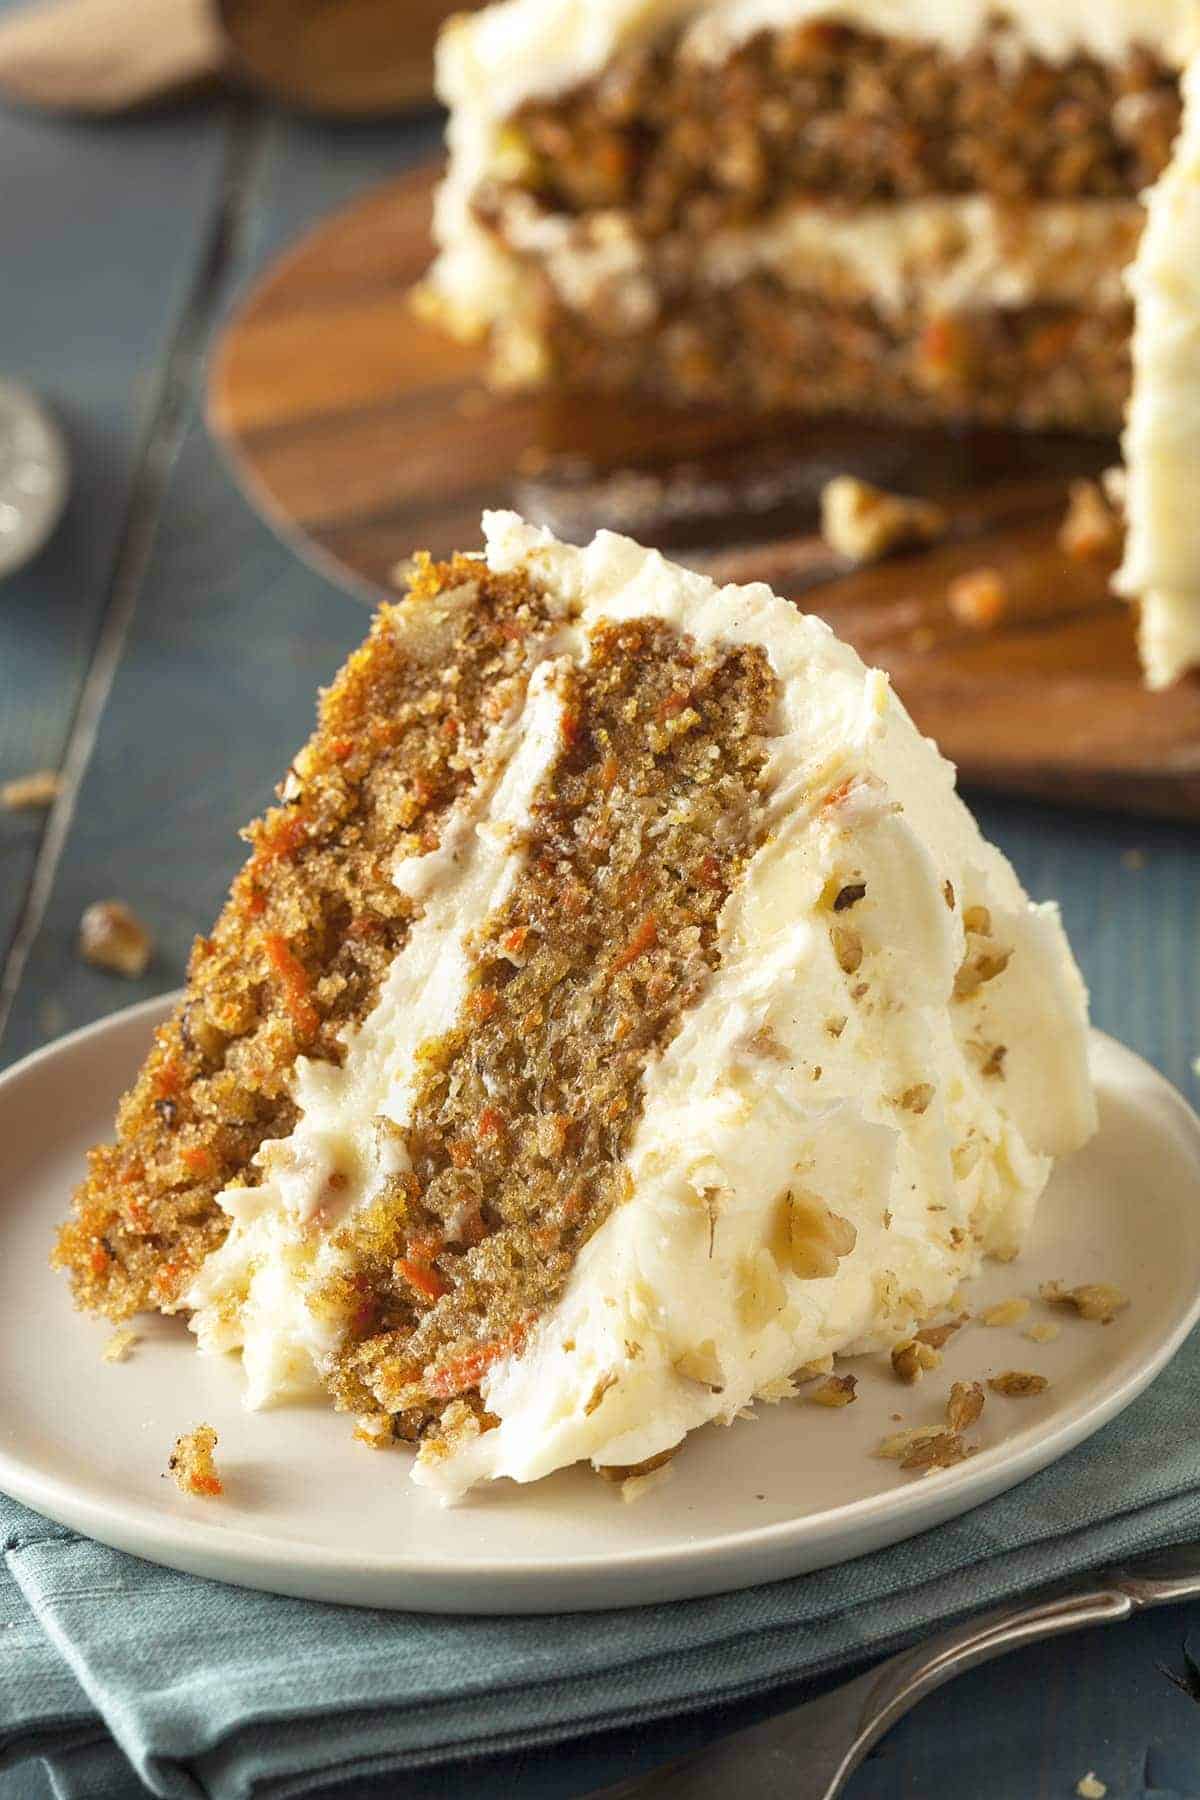 Slice of carrot cake covered in cream cheese frosting, garnished with chopped walnuts on white plate over blue towel and fork. 